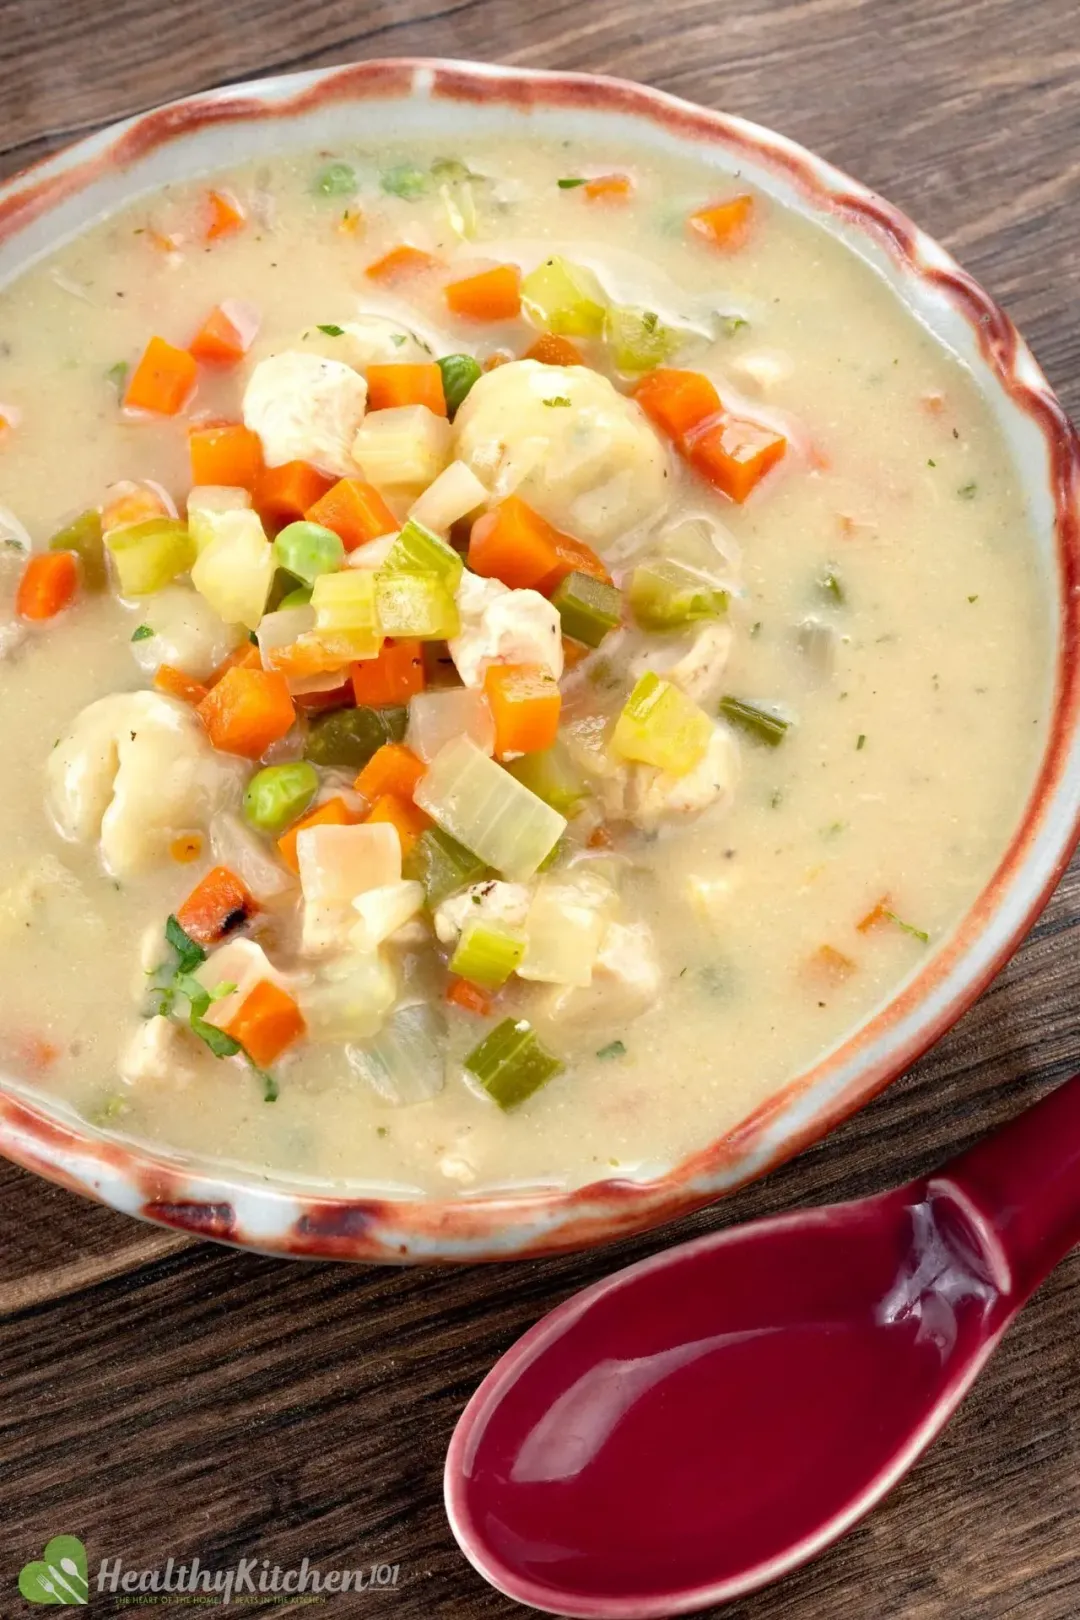 A bowl of Chicken and Dumplings soup topped with diced vegetables and a red spoon.